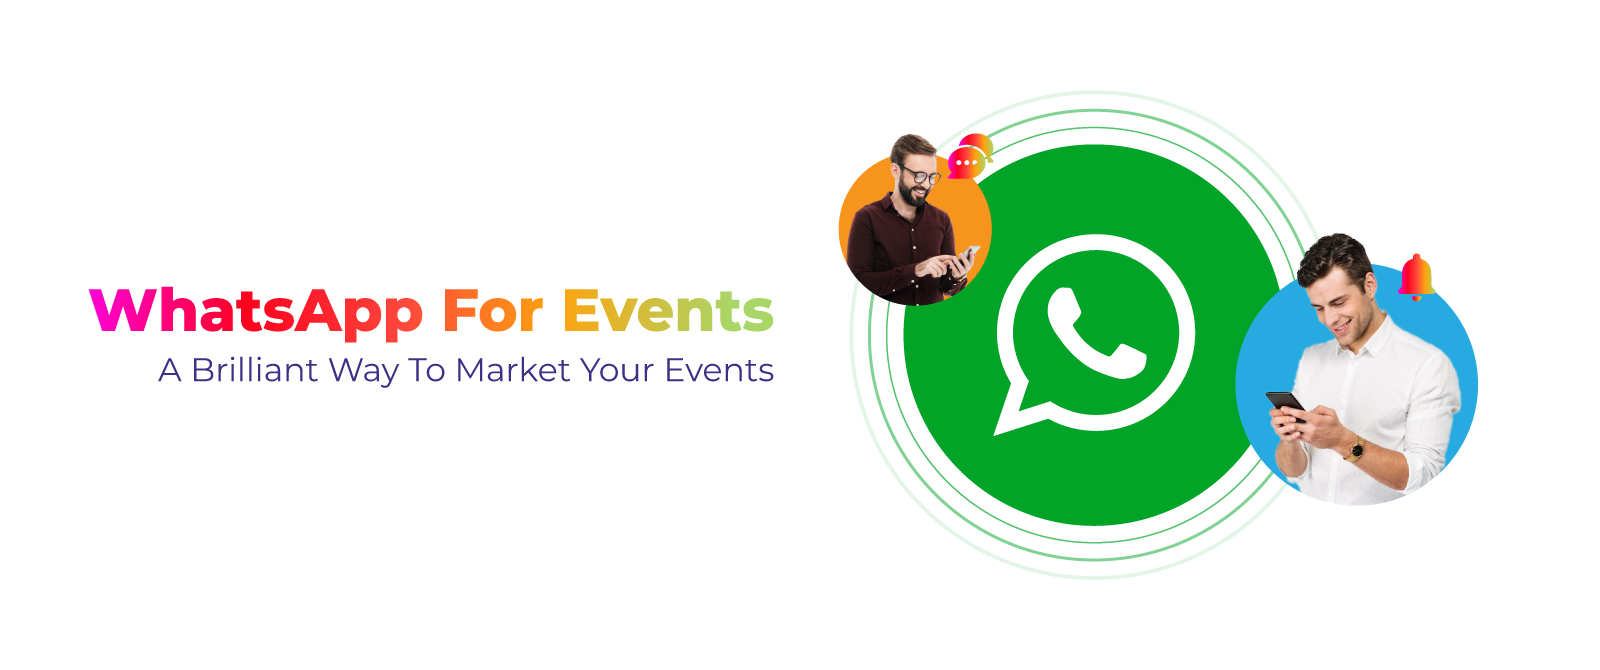 WhatsApp for Events – A Brilliant Way to Market Your Events